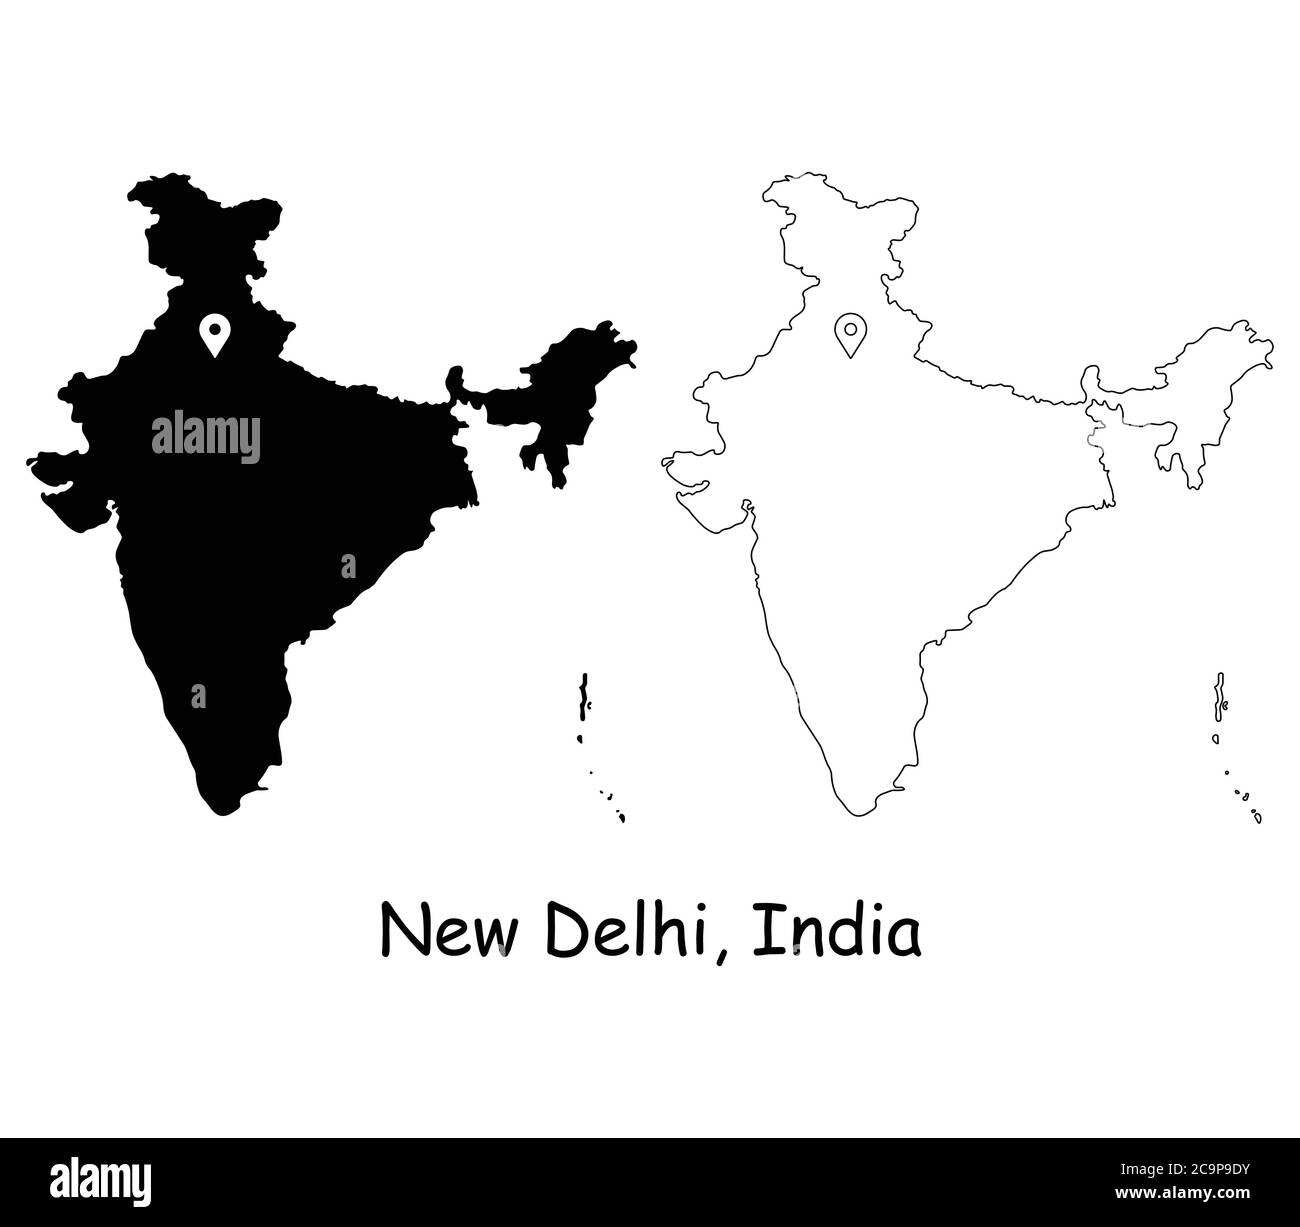 New Delhi India. Detailed Country Map with Location Pin on Capital City. Black silhouette and outline maps isolated on white background. EPS Vector Stock Vector